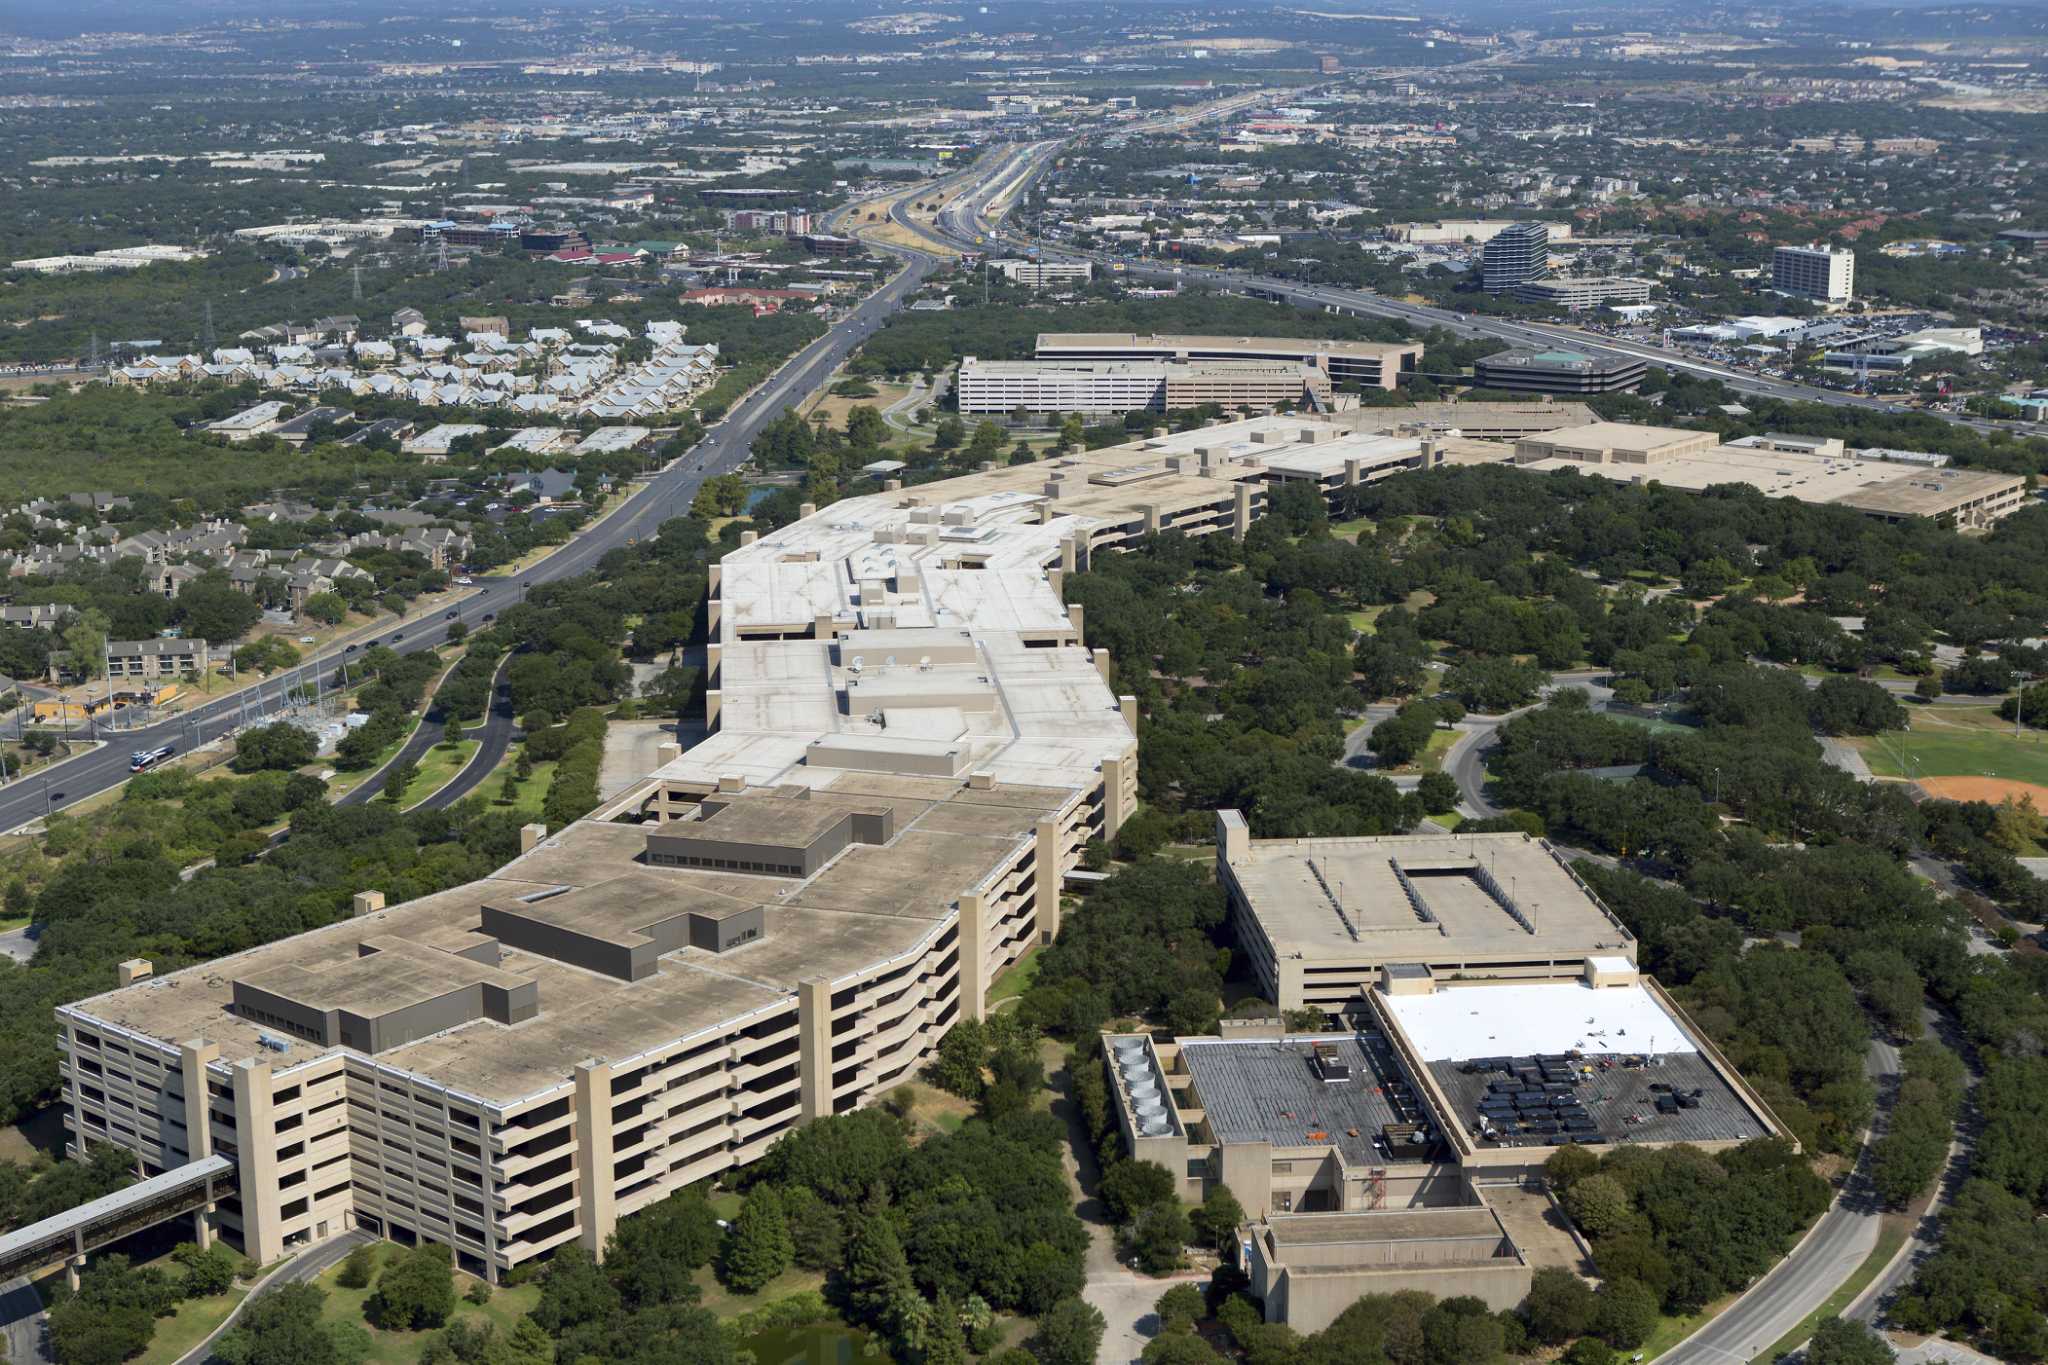 San Antoniobased USAA expands offices downtown